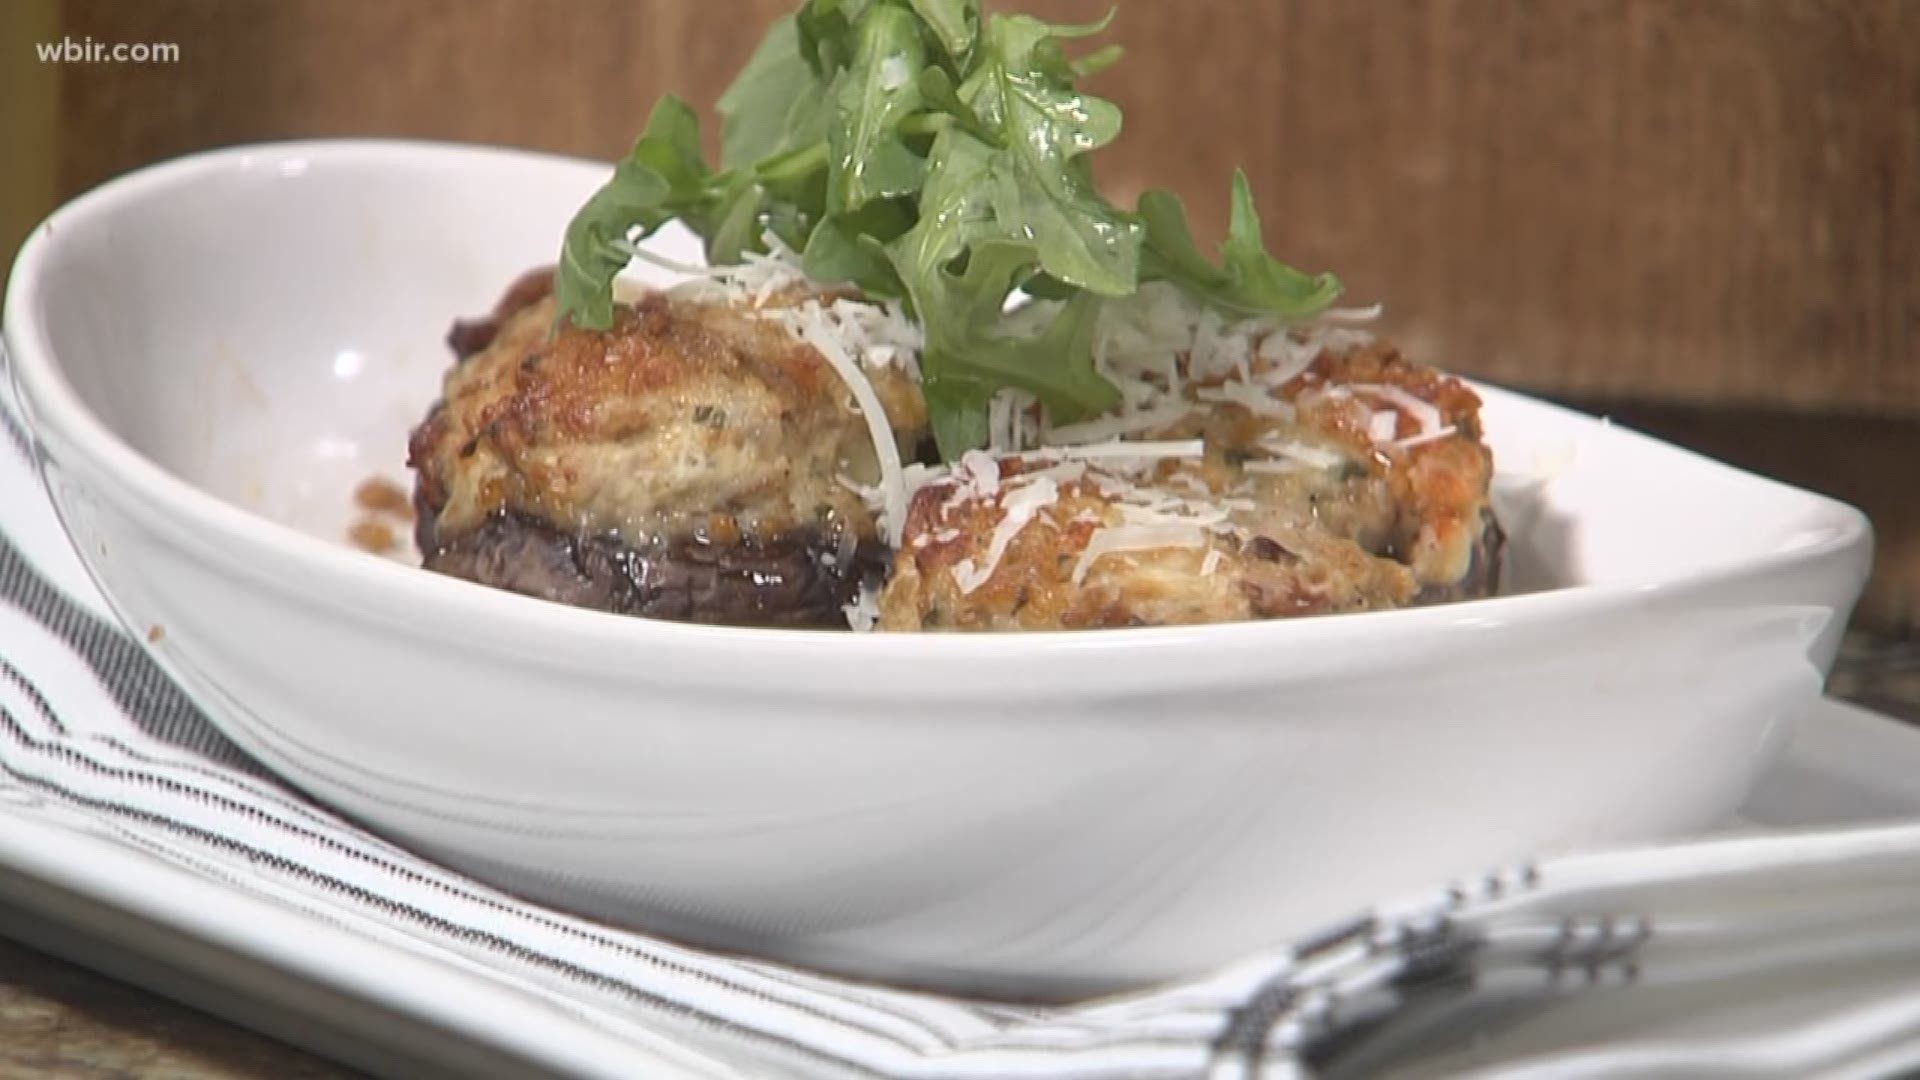 Chef Frank with Cappuccino's Italian Restaurant whips up a mushrooms stuffed with Italian Sausage and cheese.